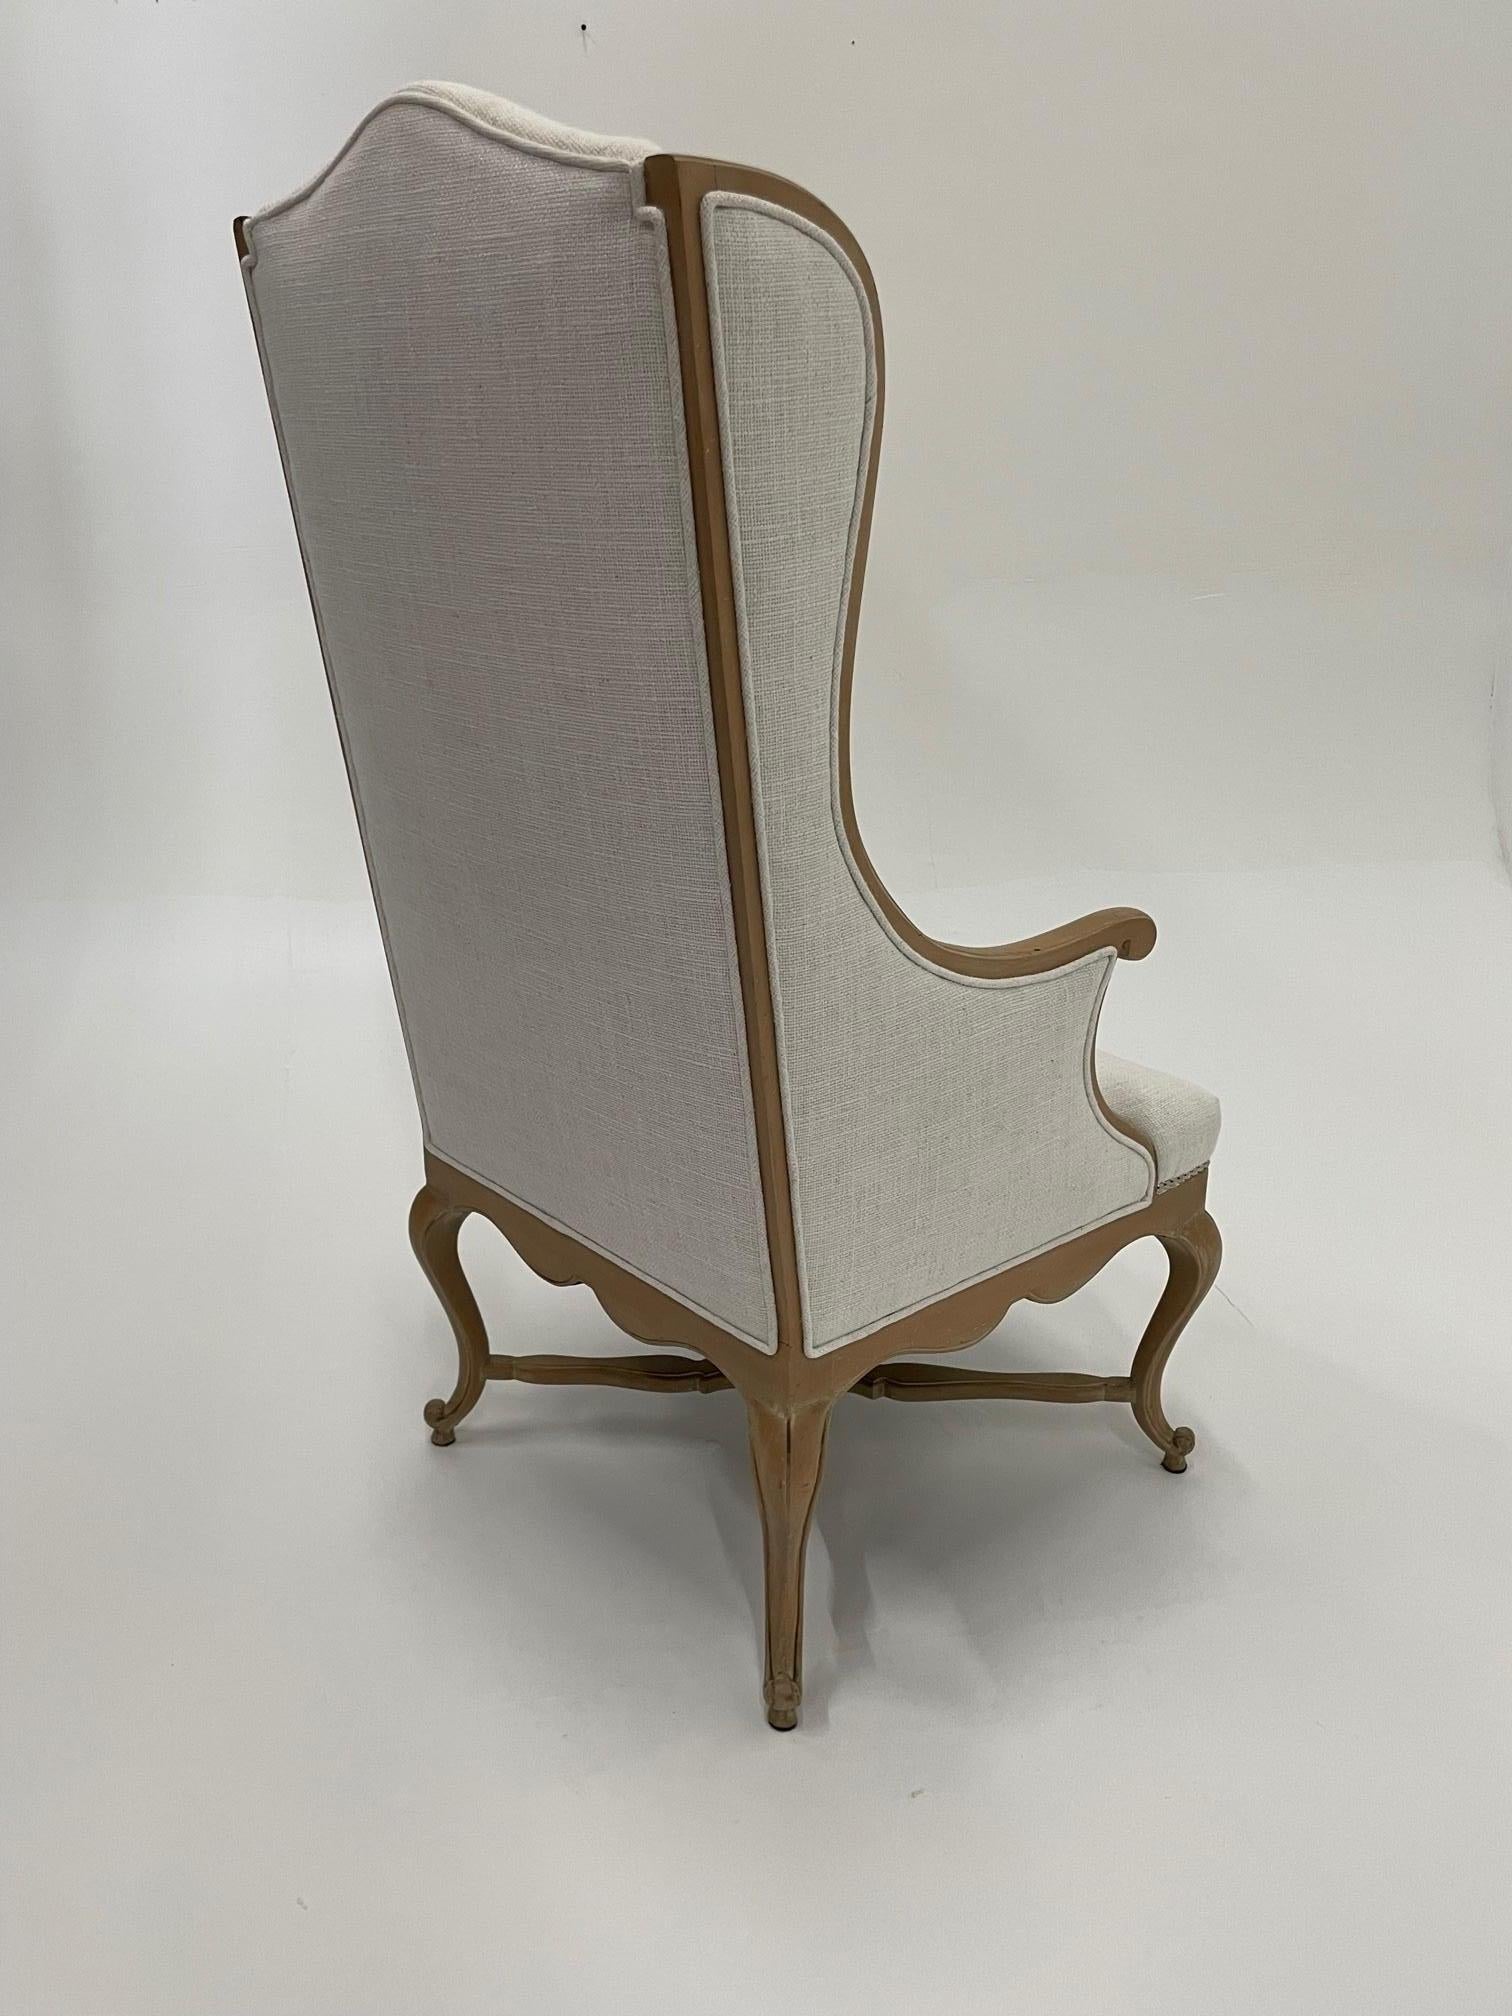 Stunning French Provincial washed oak arm chair having beautiful carved stretcher and neutral white linen upholstery.